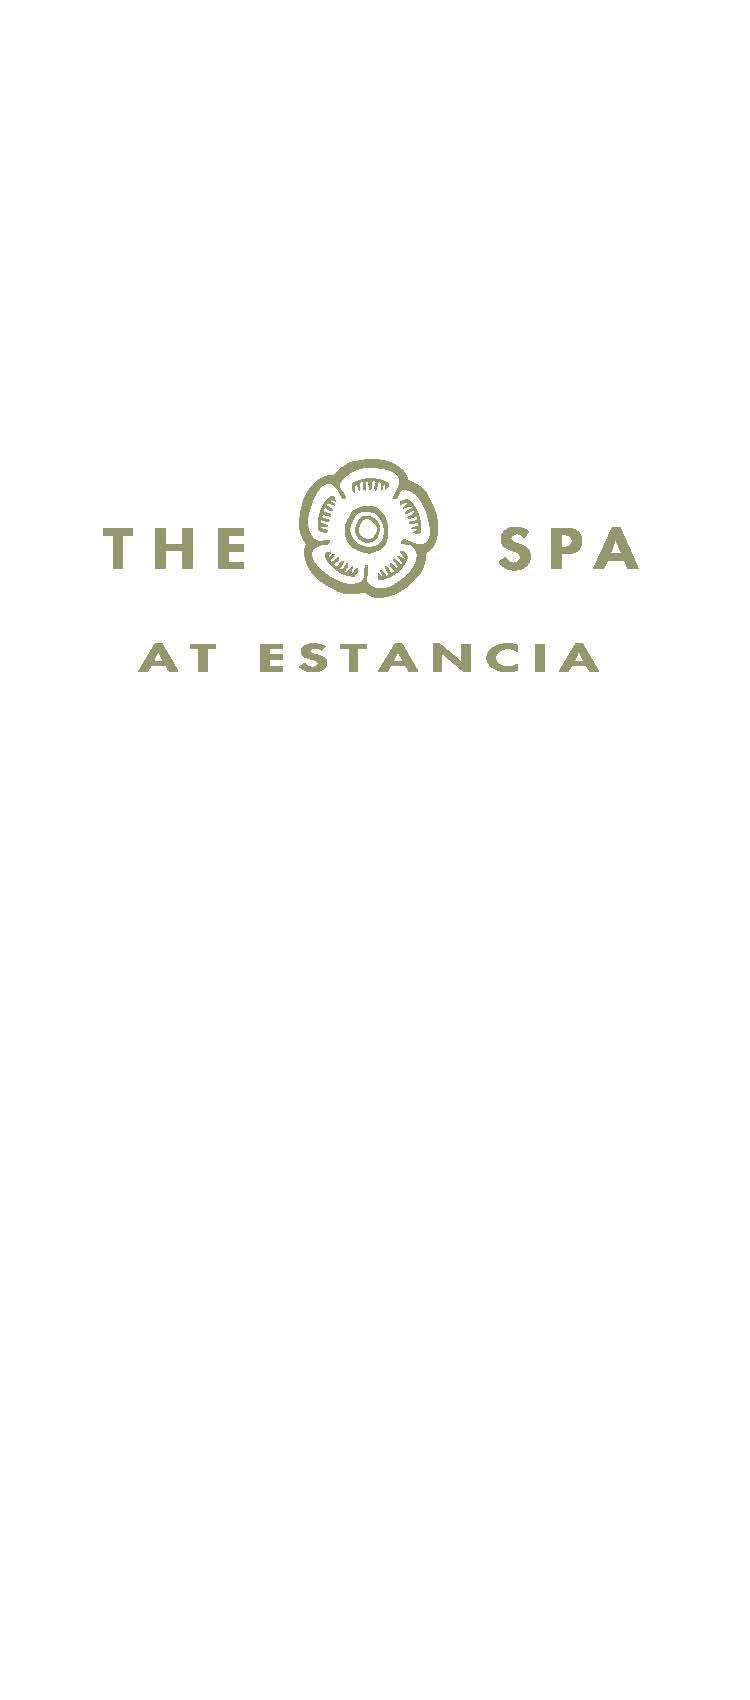 THE ~ SPA